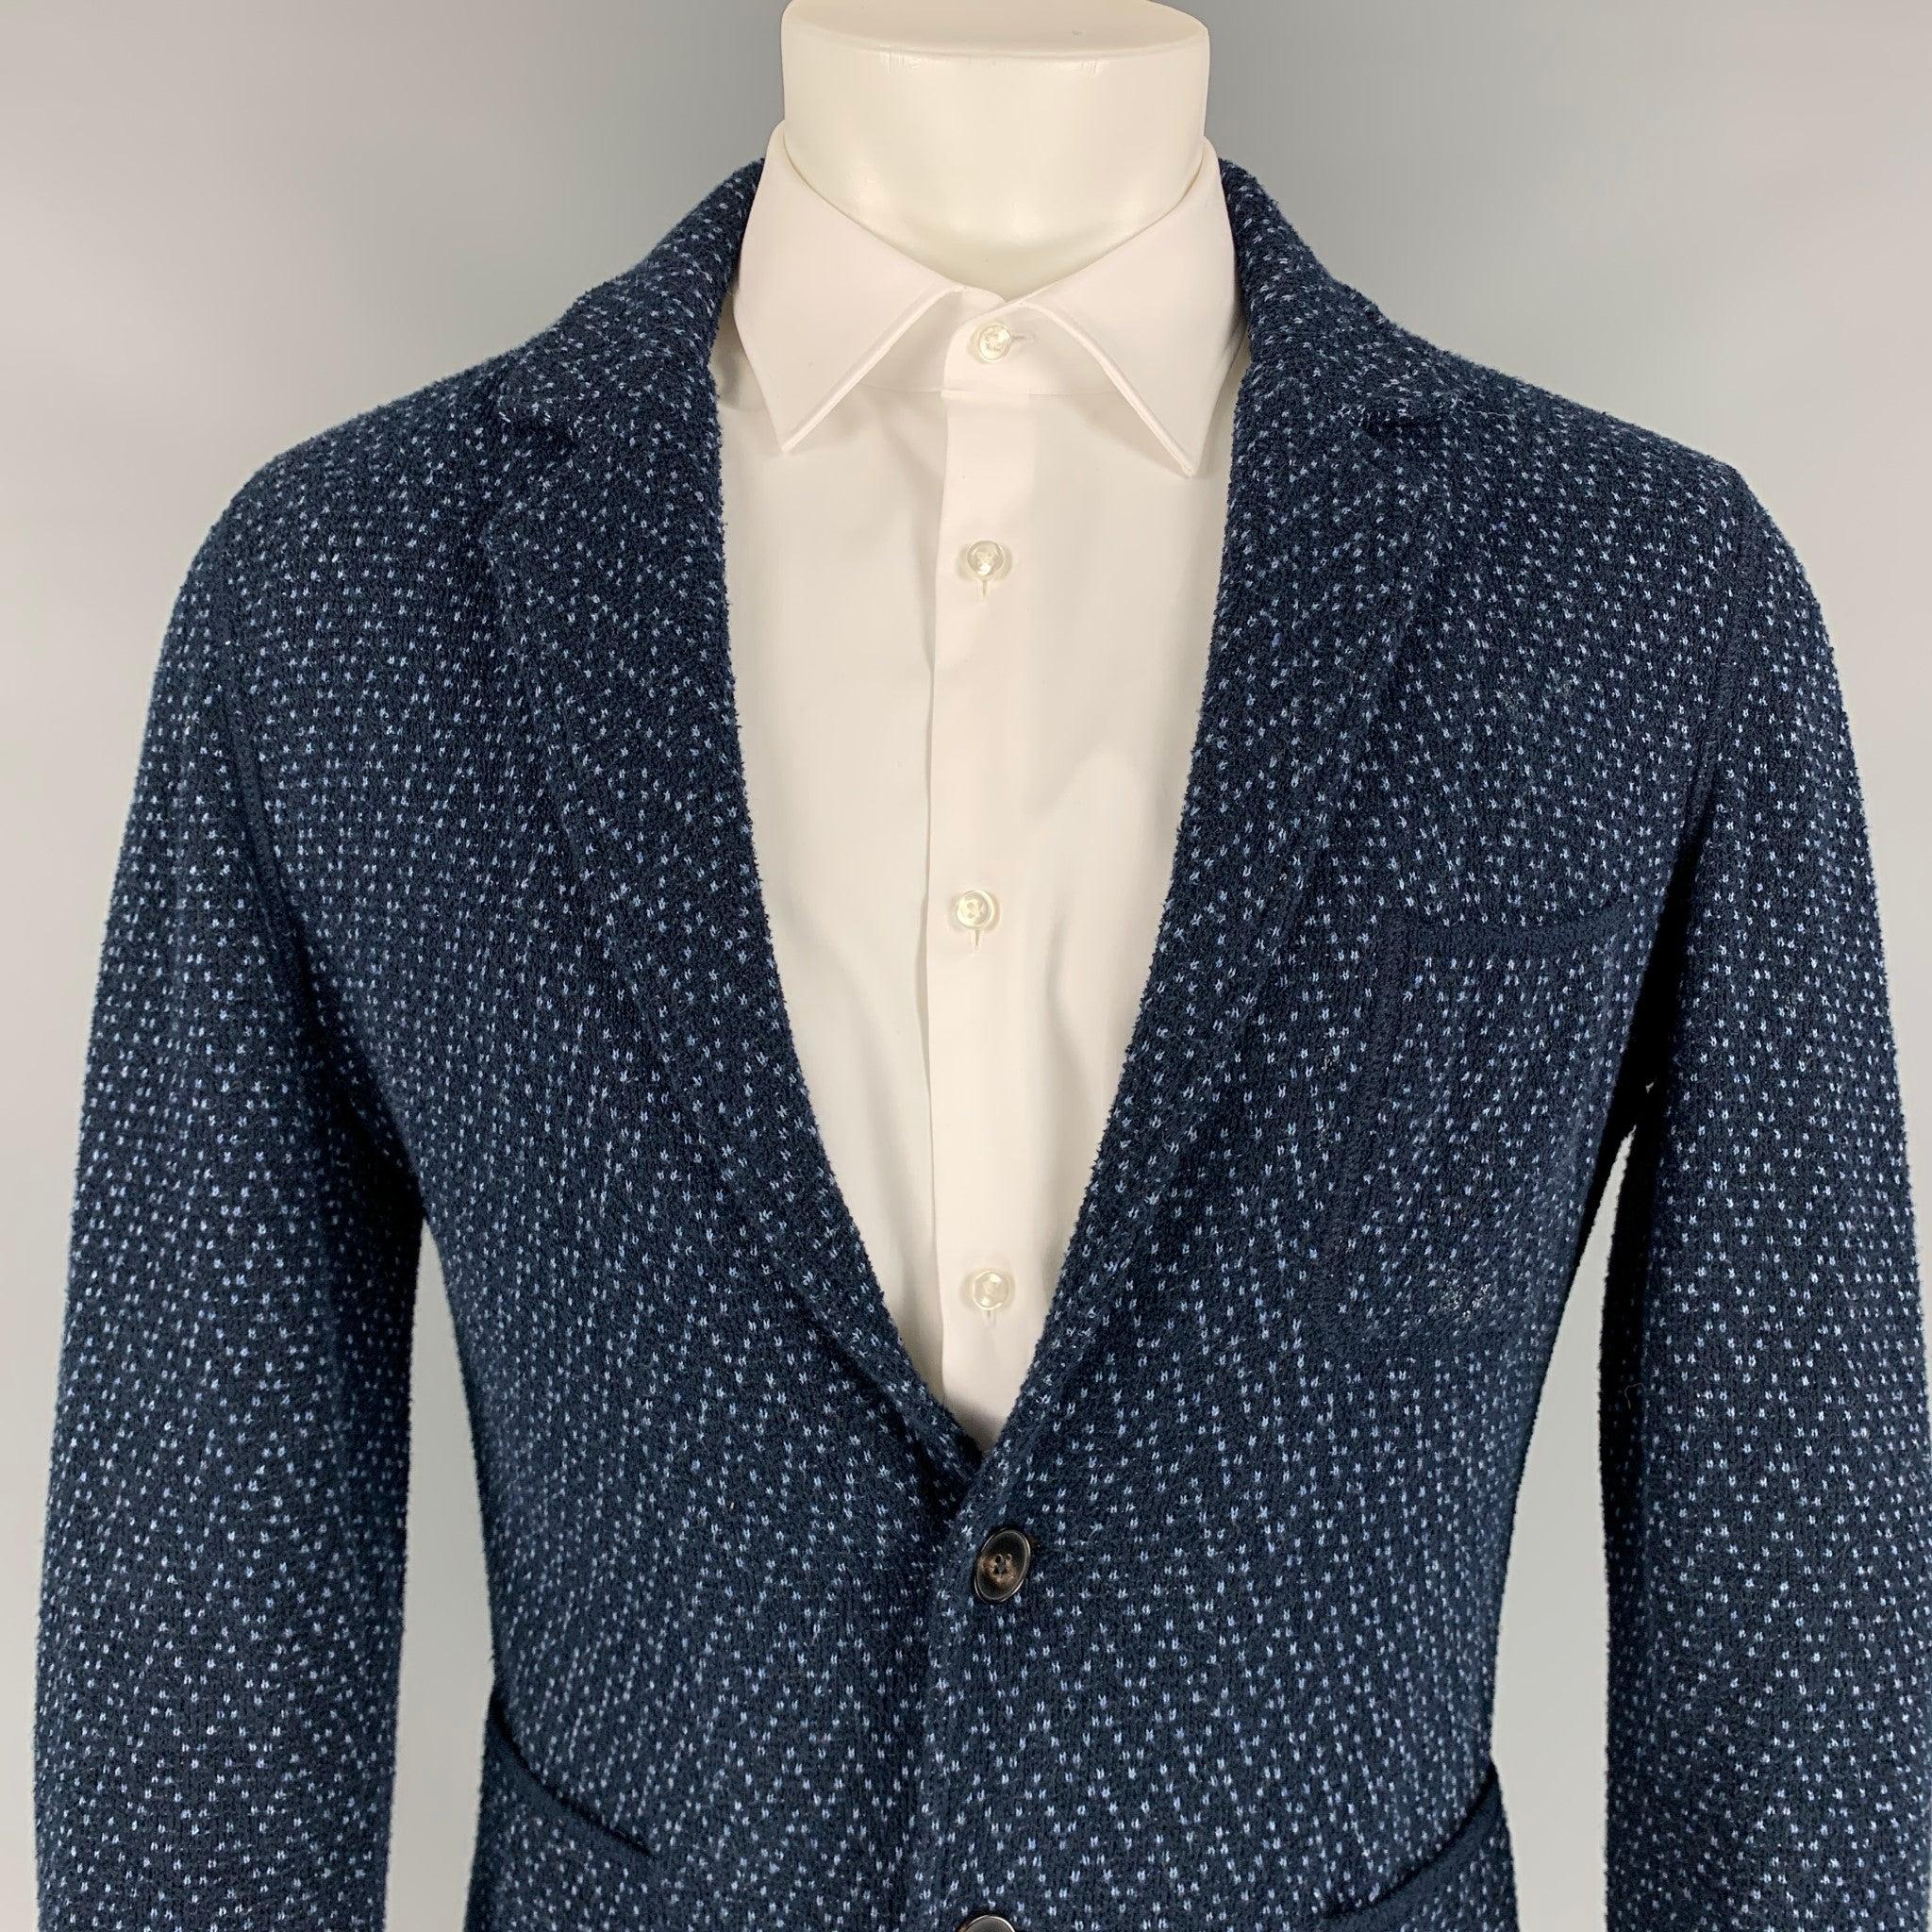 MISSONI sport coat comes in a black & blue textured material featuring a notch lapel, patch pockets, and a two button closure. Made in Italy.
Very Good
Pre-Owned Condition. 

Marked:   48 

Measurements: 
 
Shoulder: 18 inches  Chest: 38 inches 